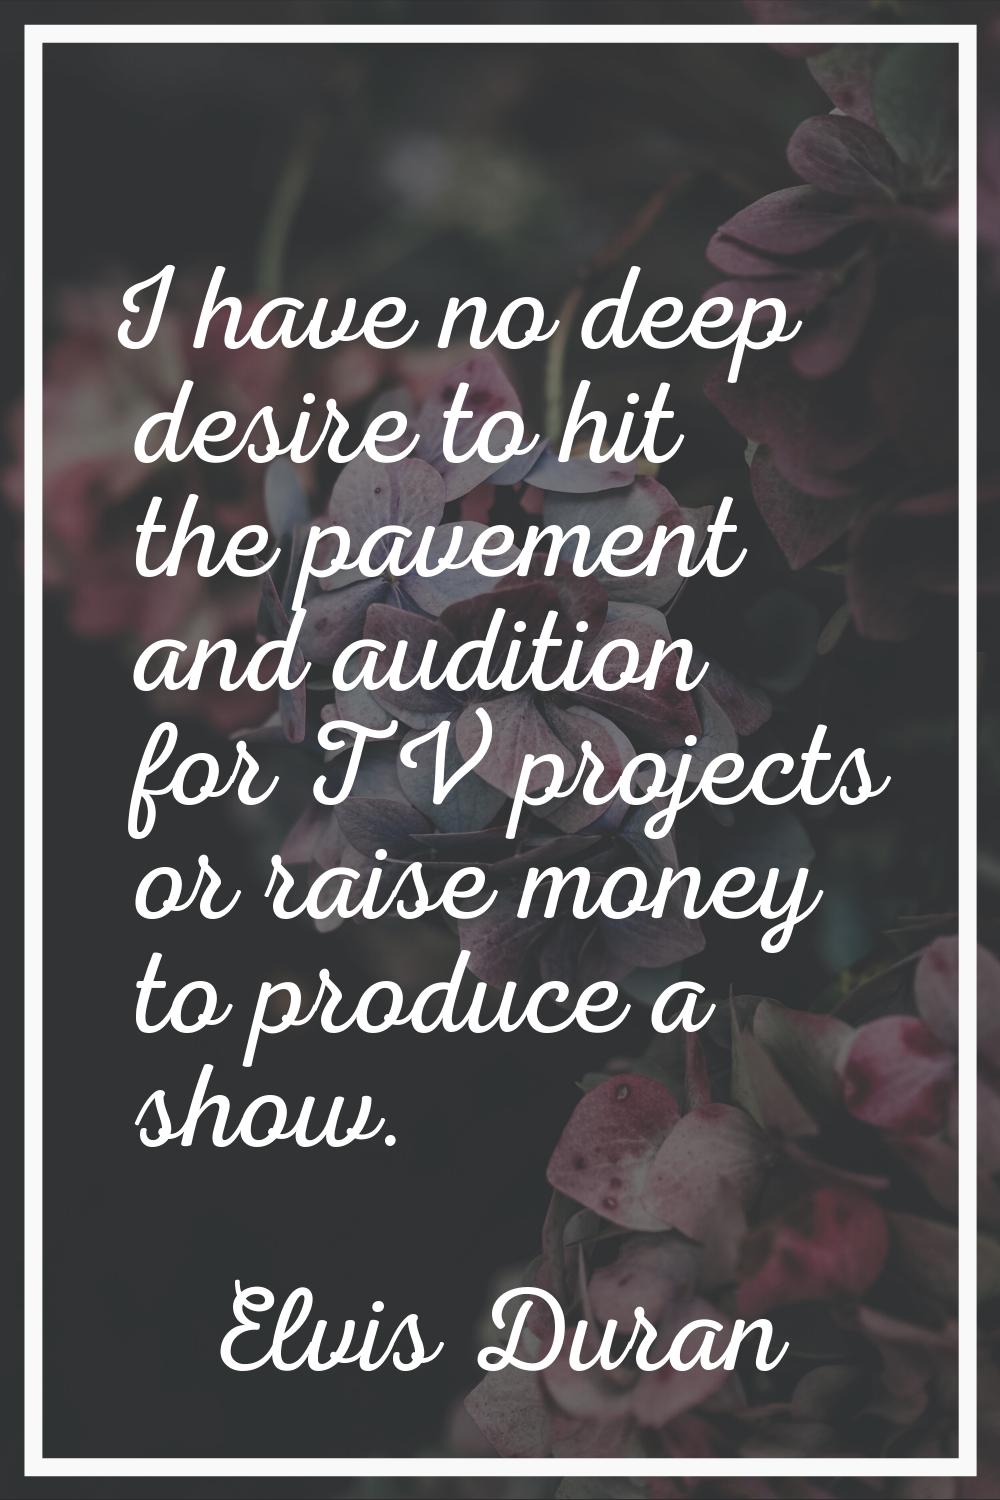 I have no deep desire to hit the pavement and audition for TV projects or raise money to produce a 